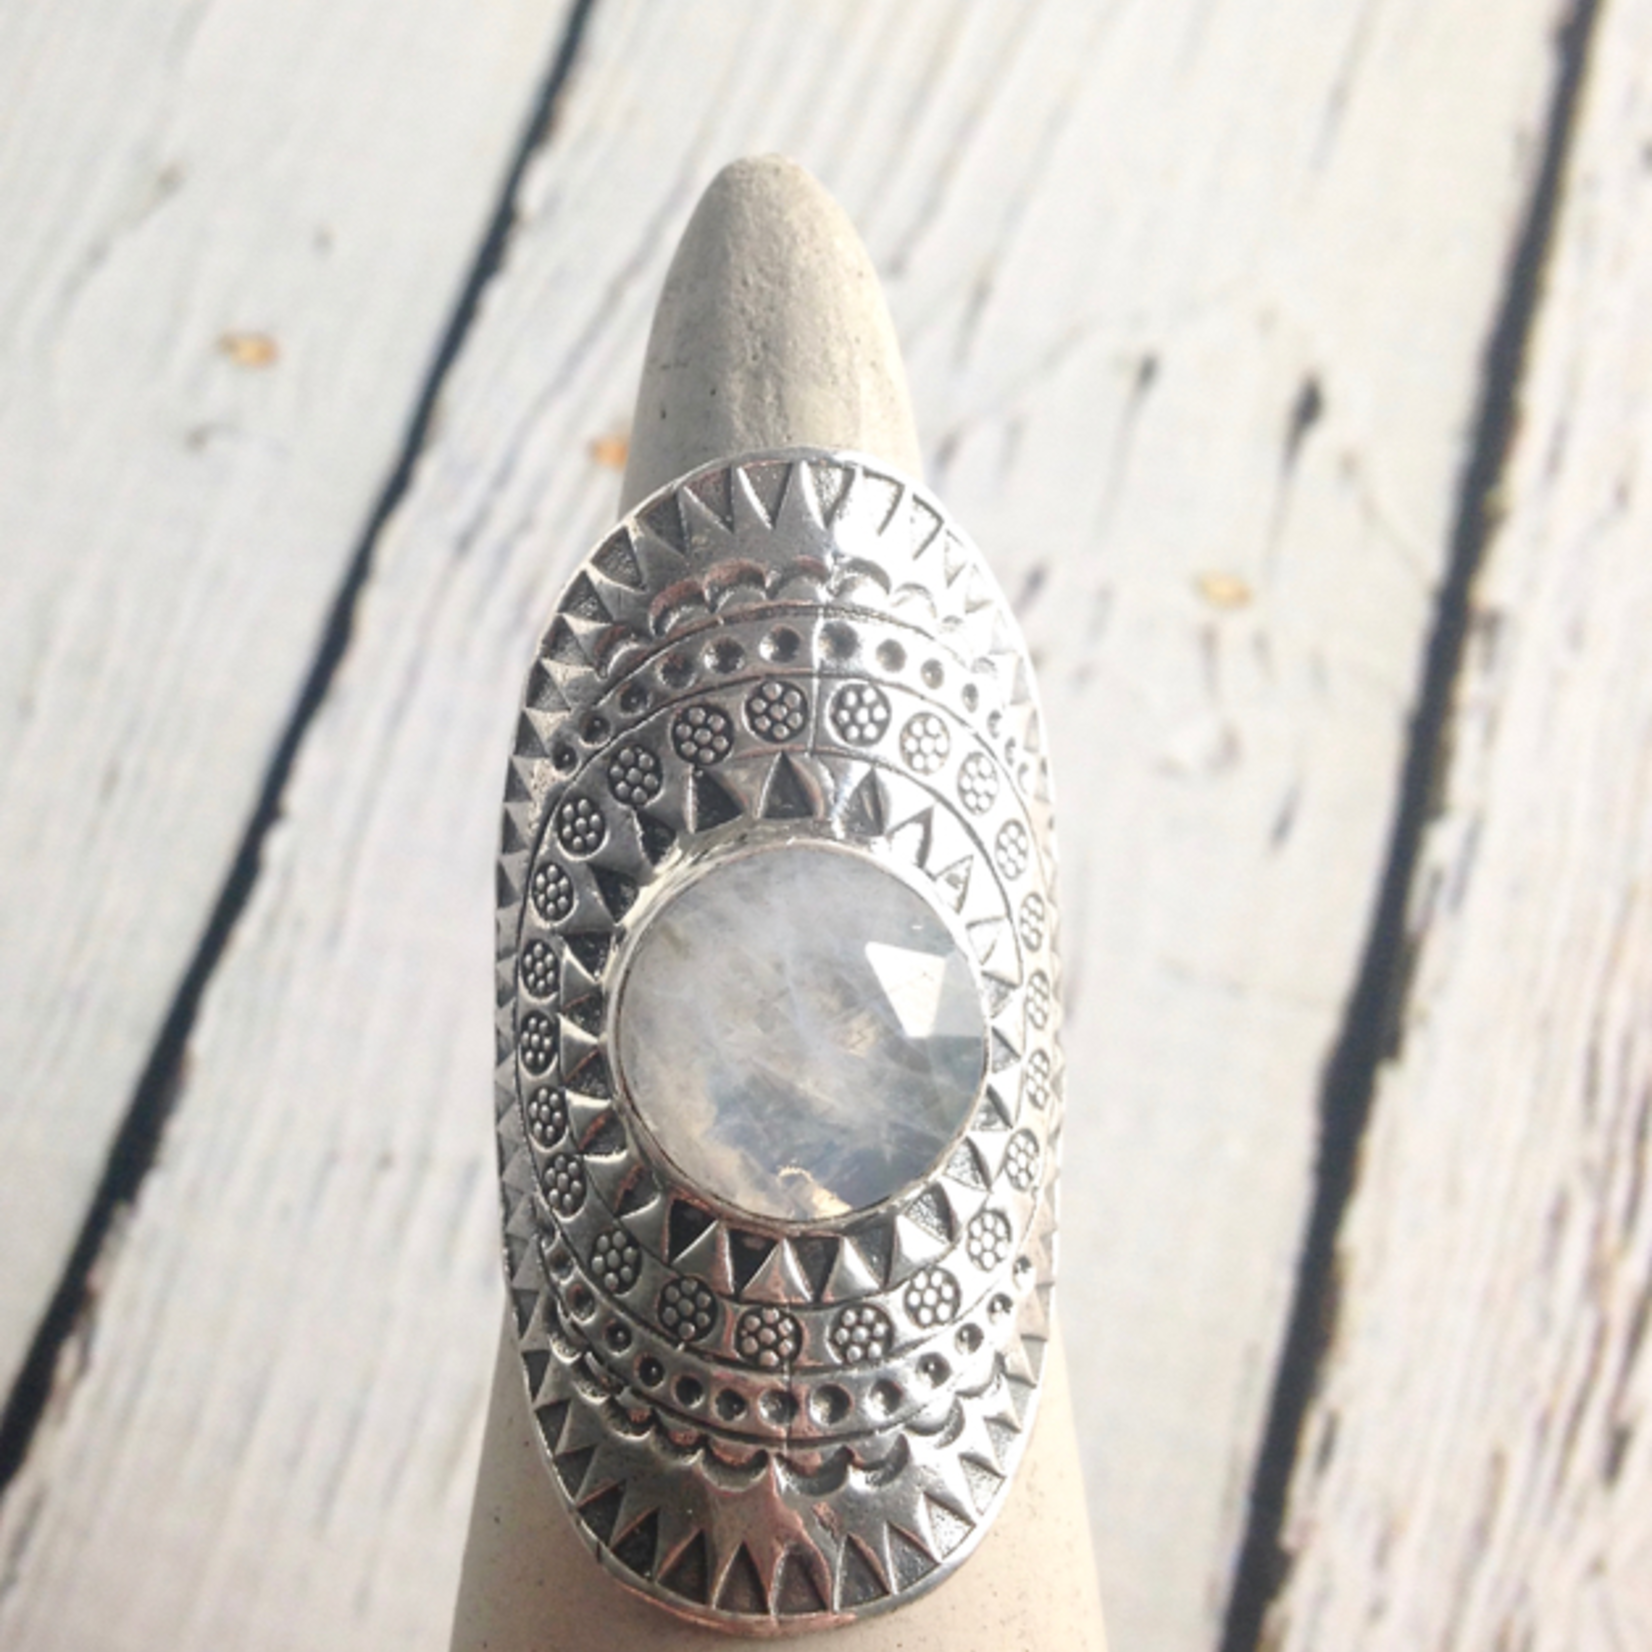 hilltribe Stamped Silver Ring with Round Faceted Moonstone, Size 9